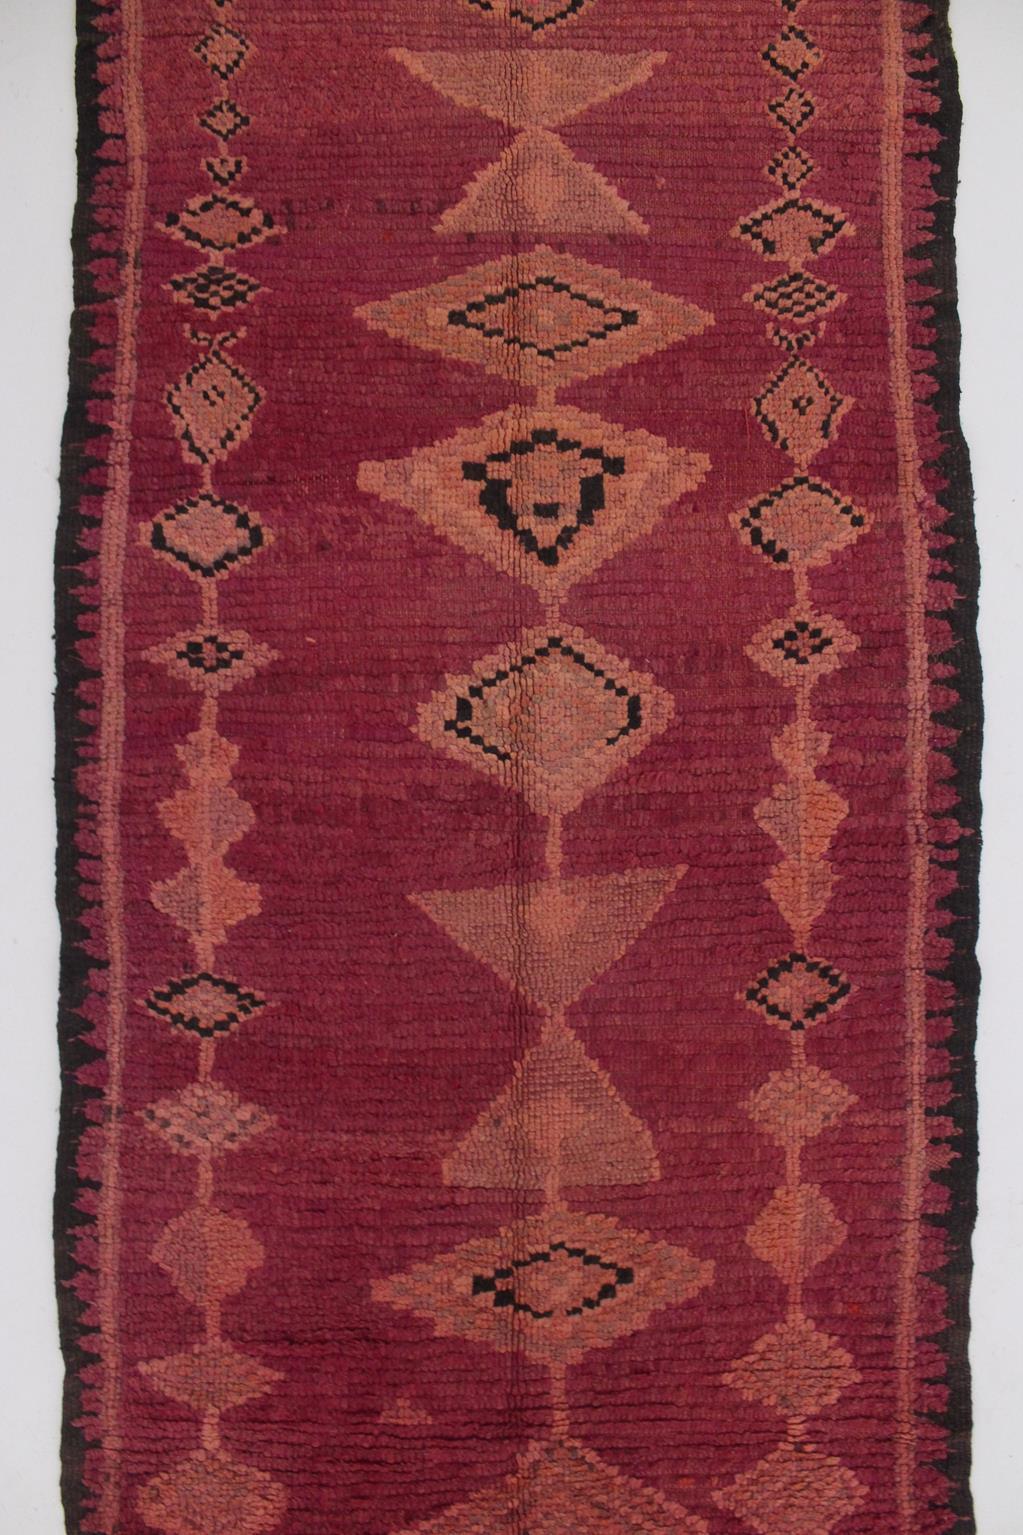 Vintage Moroccan Boujad runner rug - Raspberry - 3.4x10.5feet / 105x320cm In Good Condition For Sale In Marrakech, MA